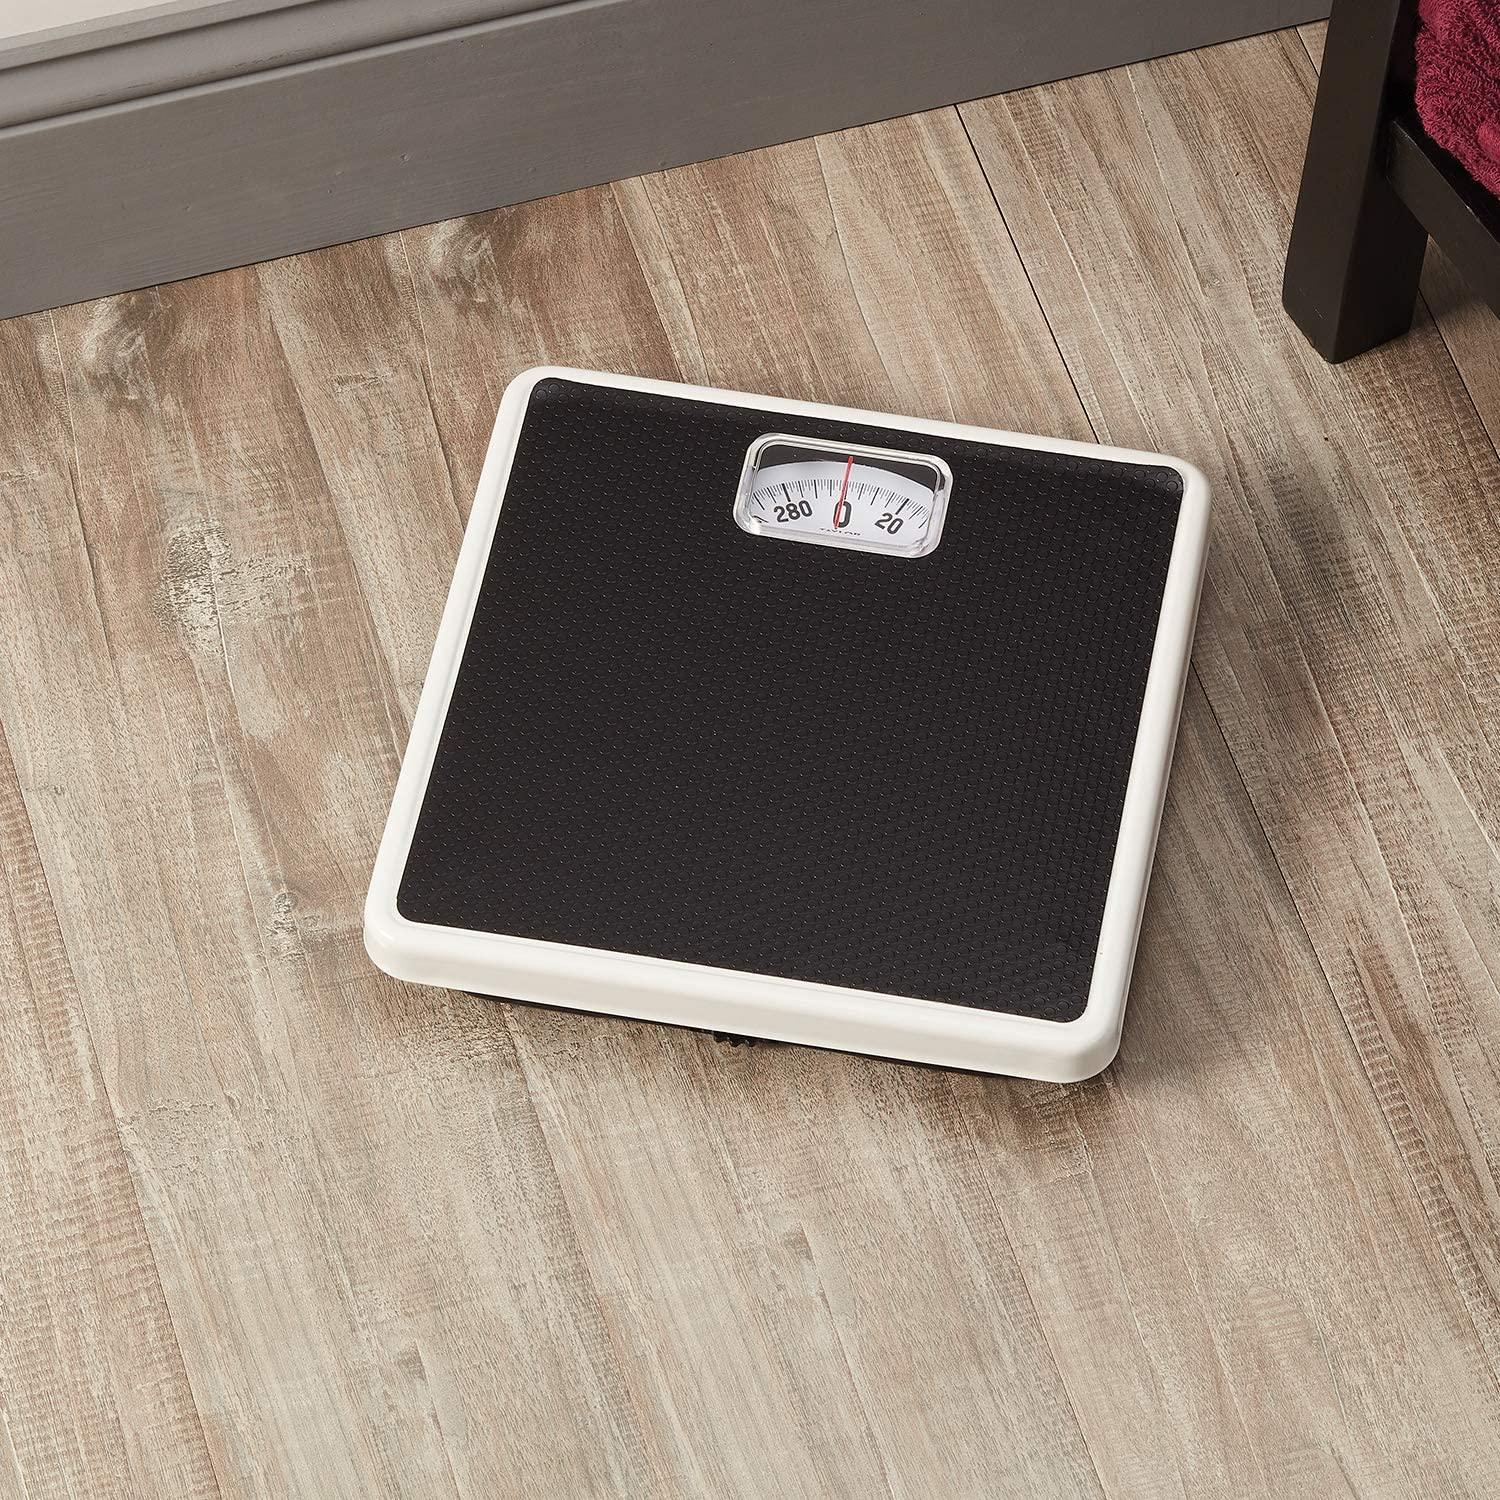 Mainstays Analog Bathroom Scale,Dial Body Scale,Weight 300 lbs